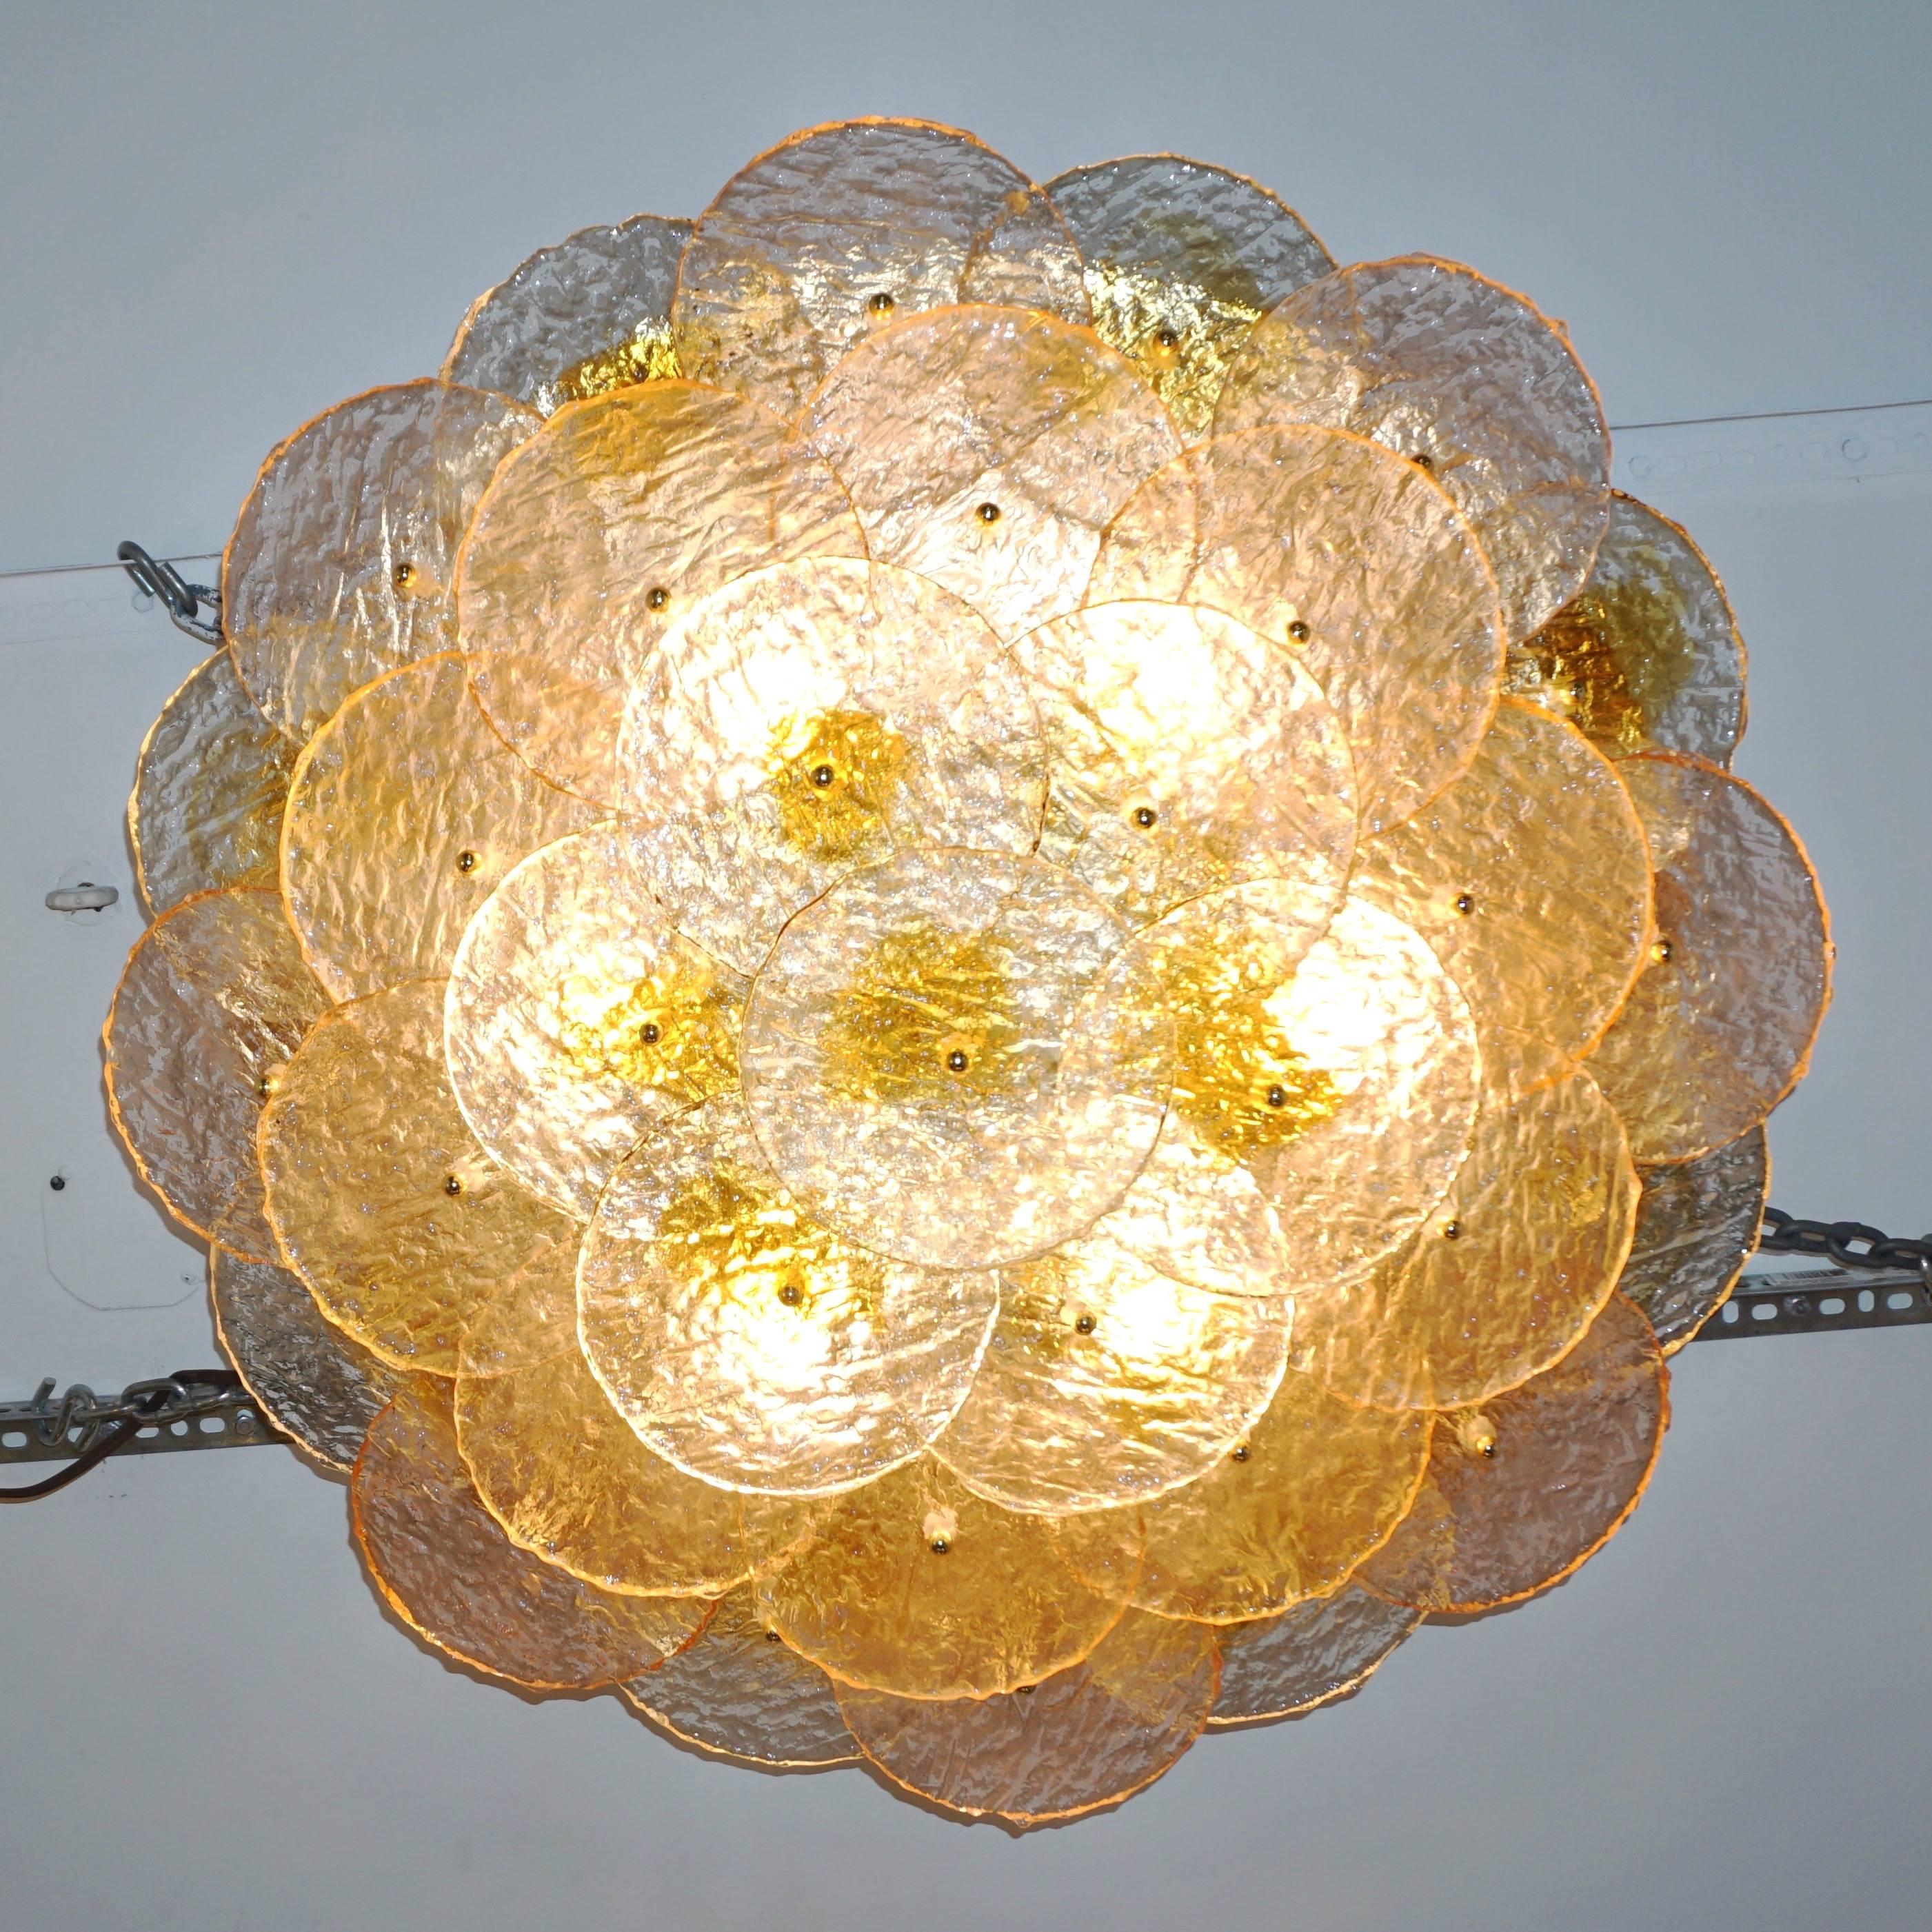 Italian Design vintage floral flush mount chandelier, original by Maestro blower Alberto Donà from the 70s, this organic modern lighting fixture comes from the family of the artist. The textured crystal Murano glass disks in pink rose and amber gold